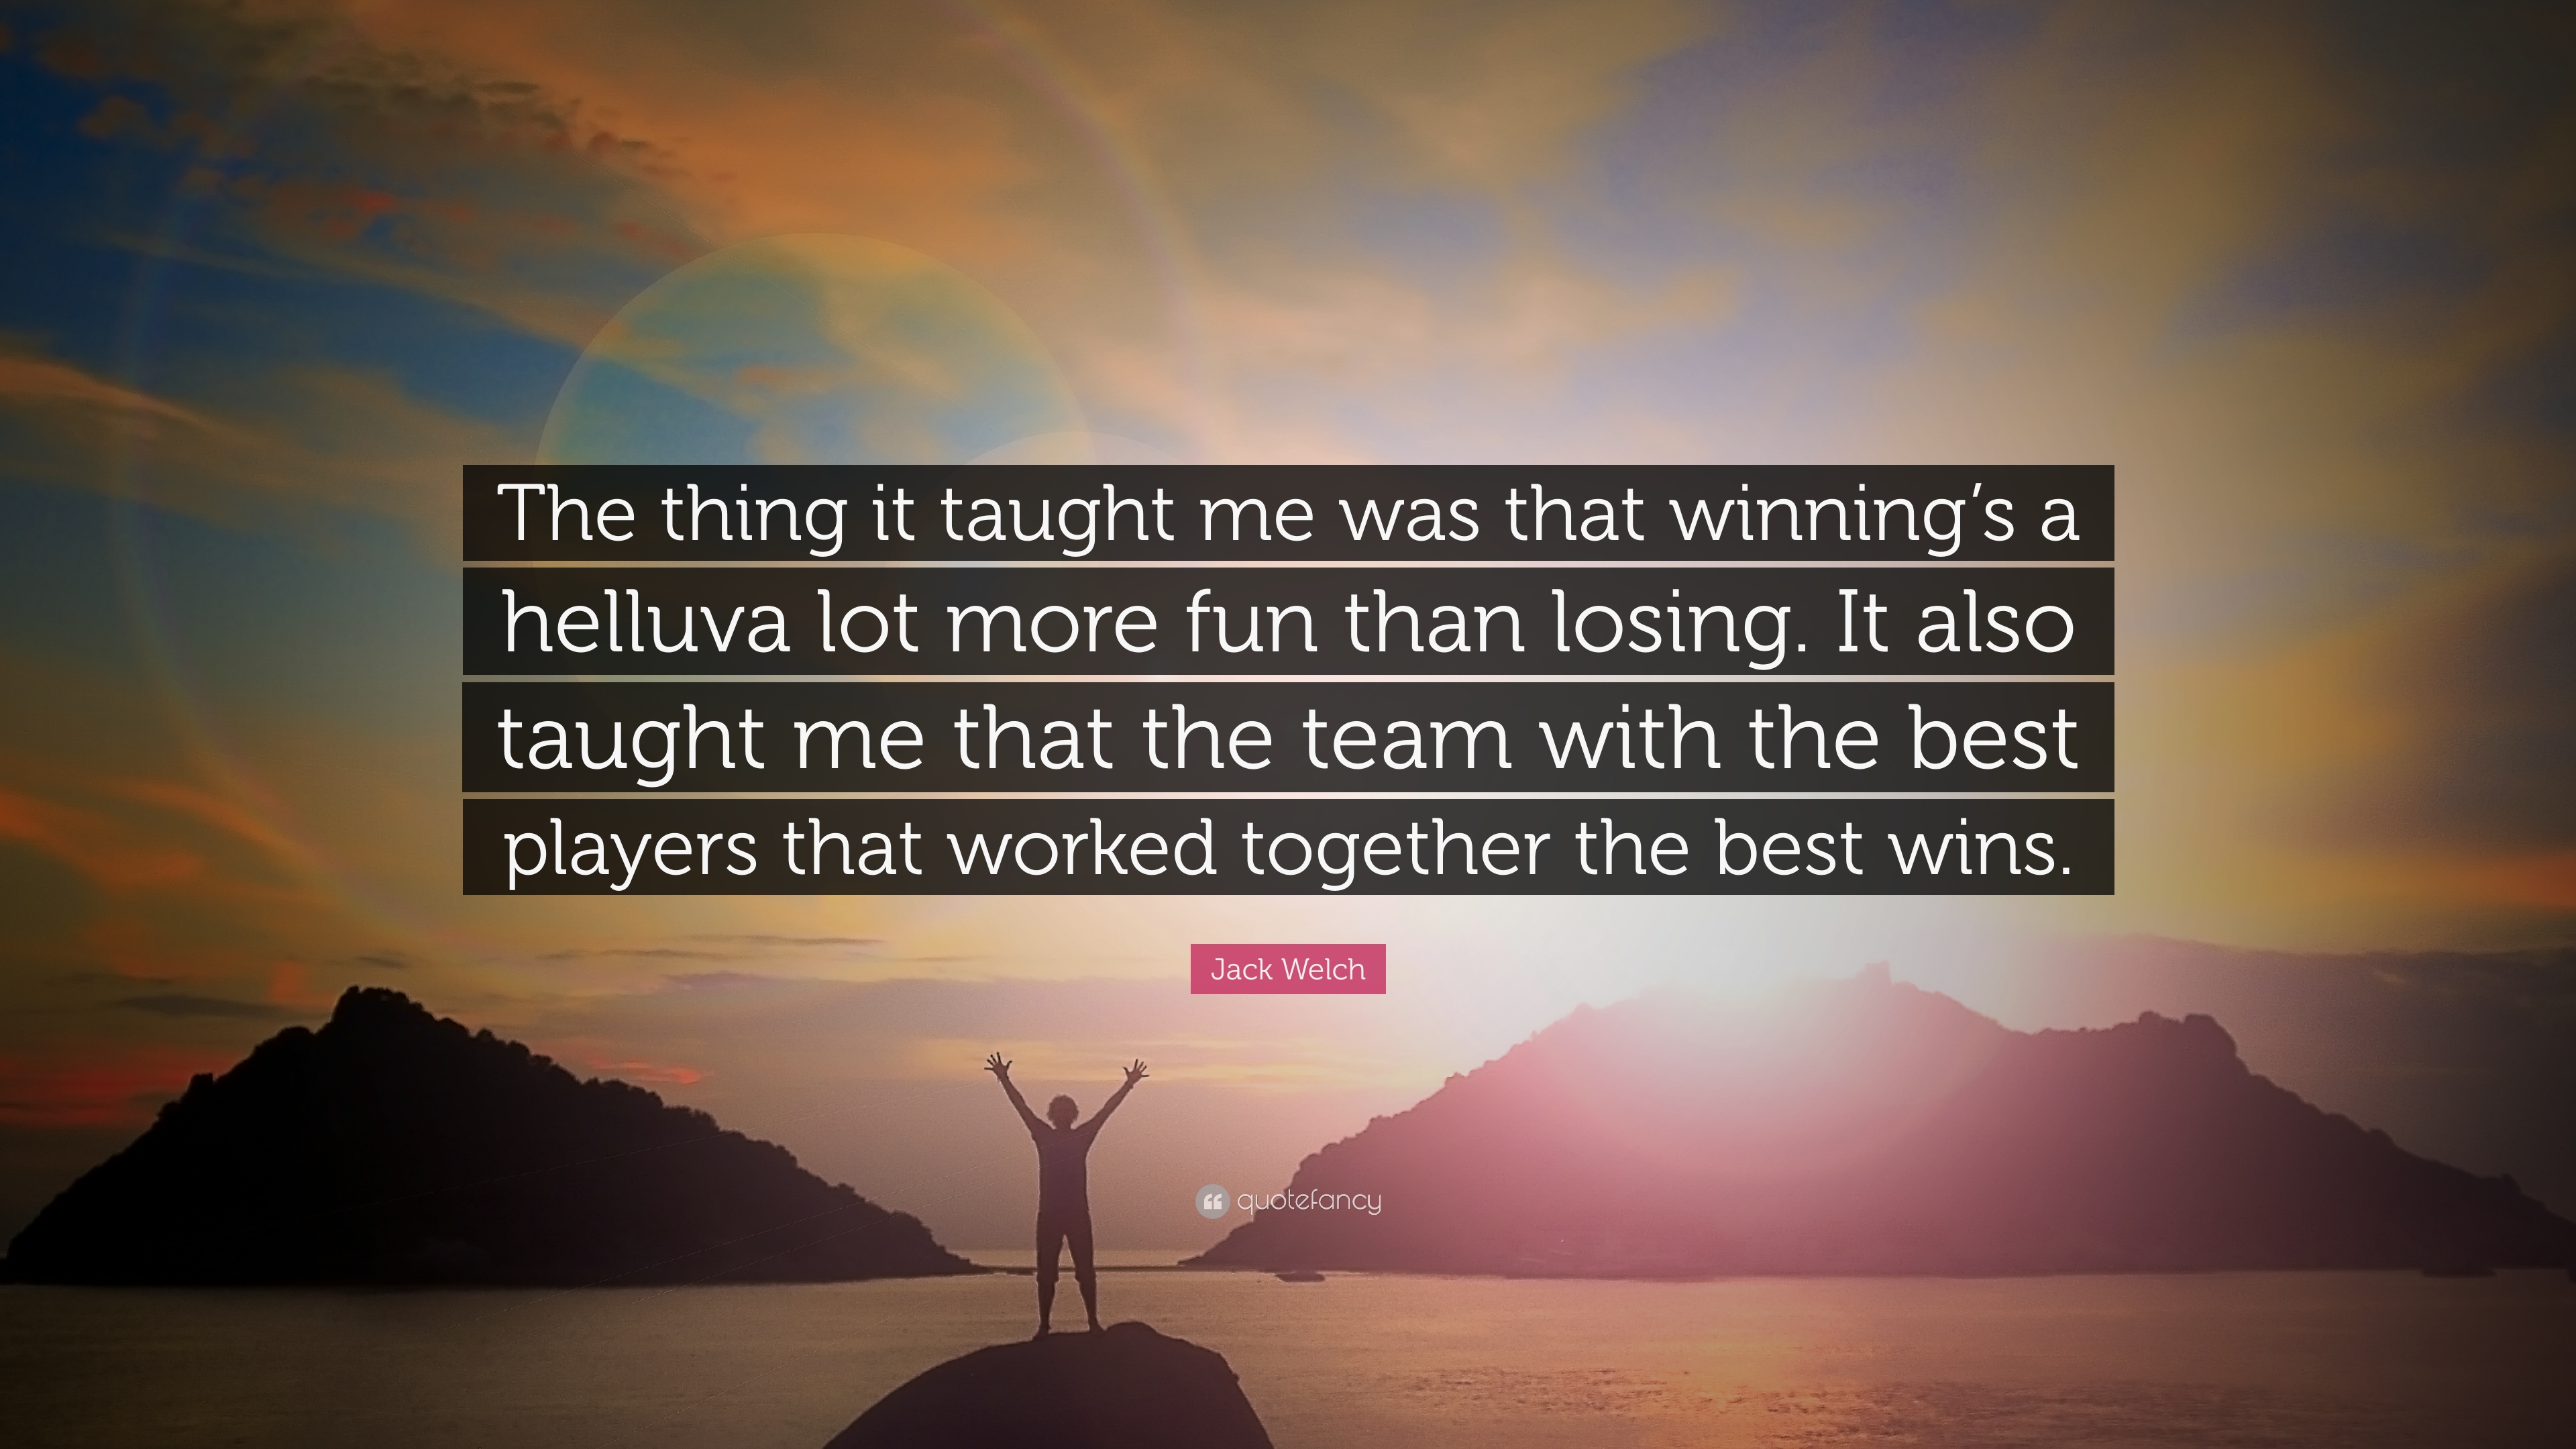 Jack Welch Quote: “The thing it taught me was that winning's